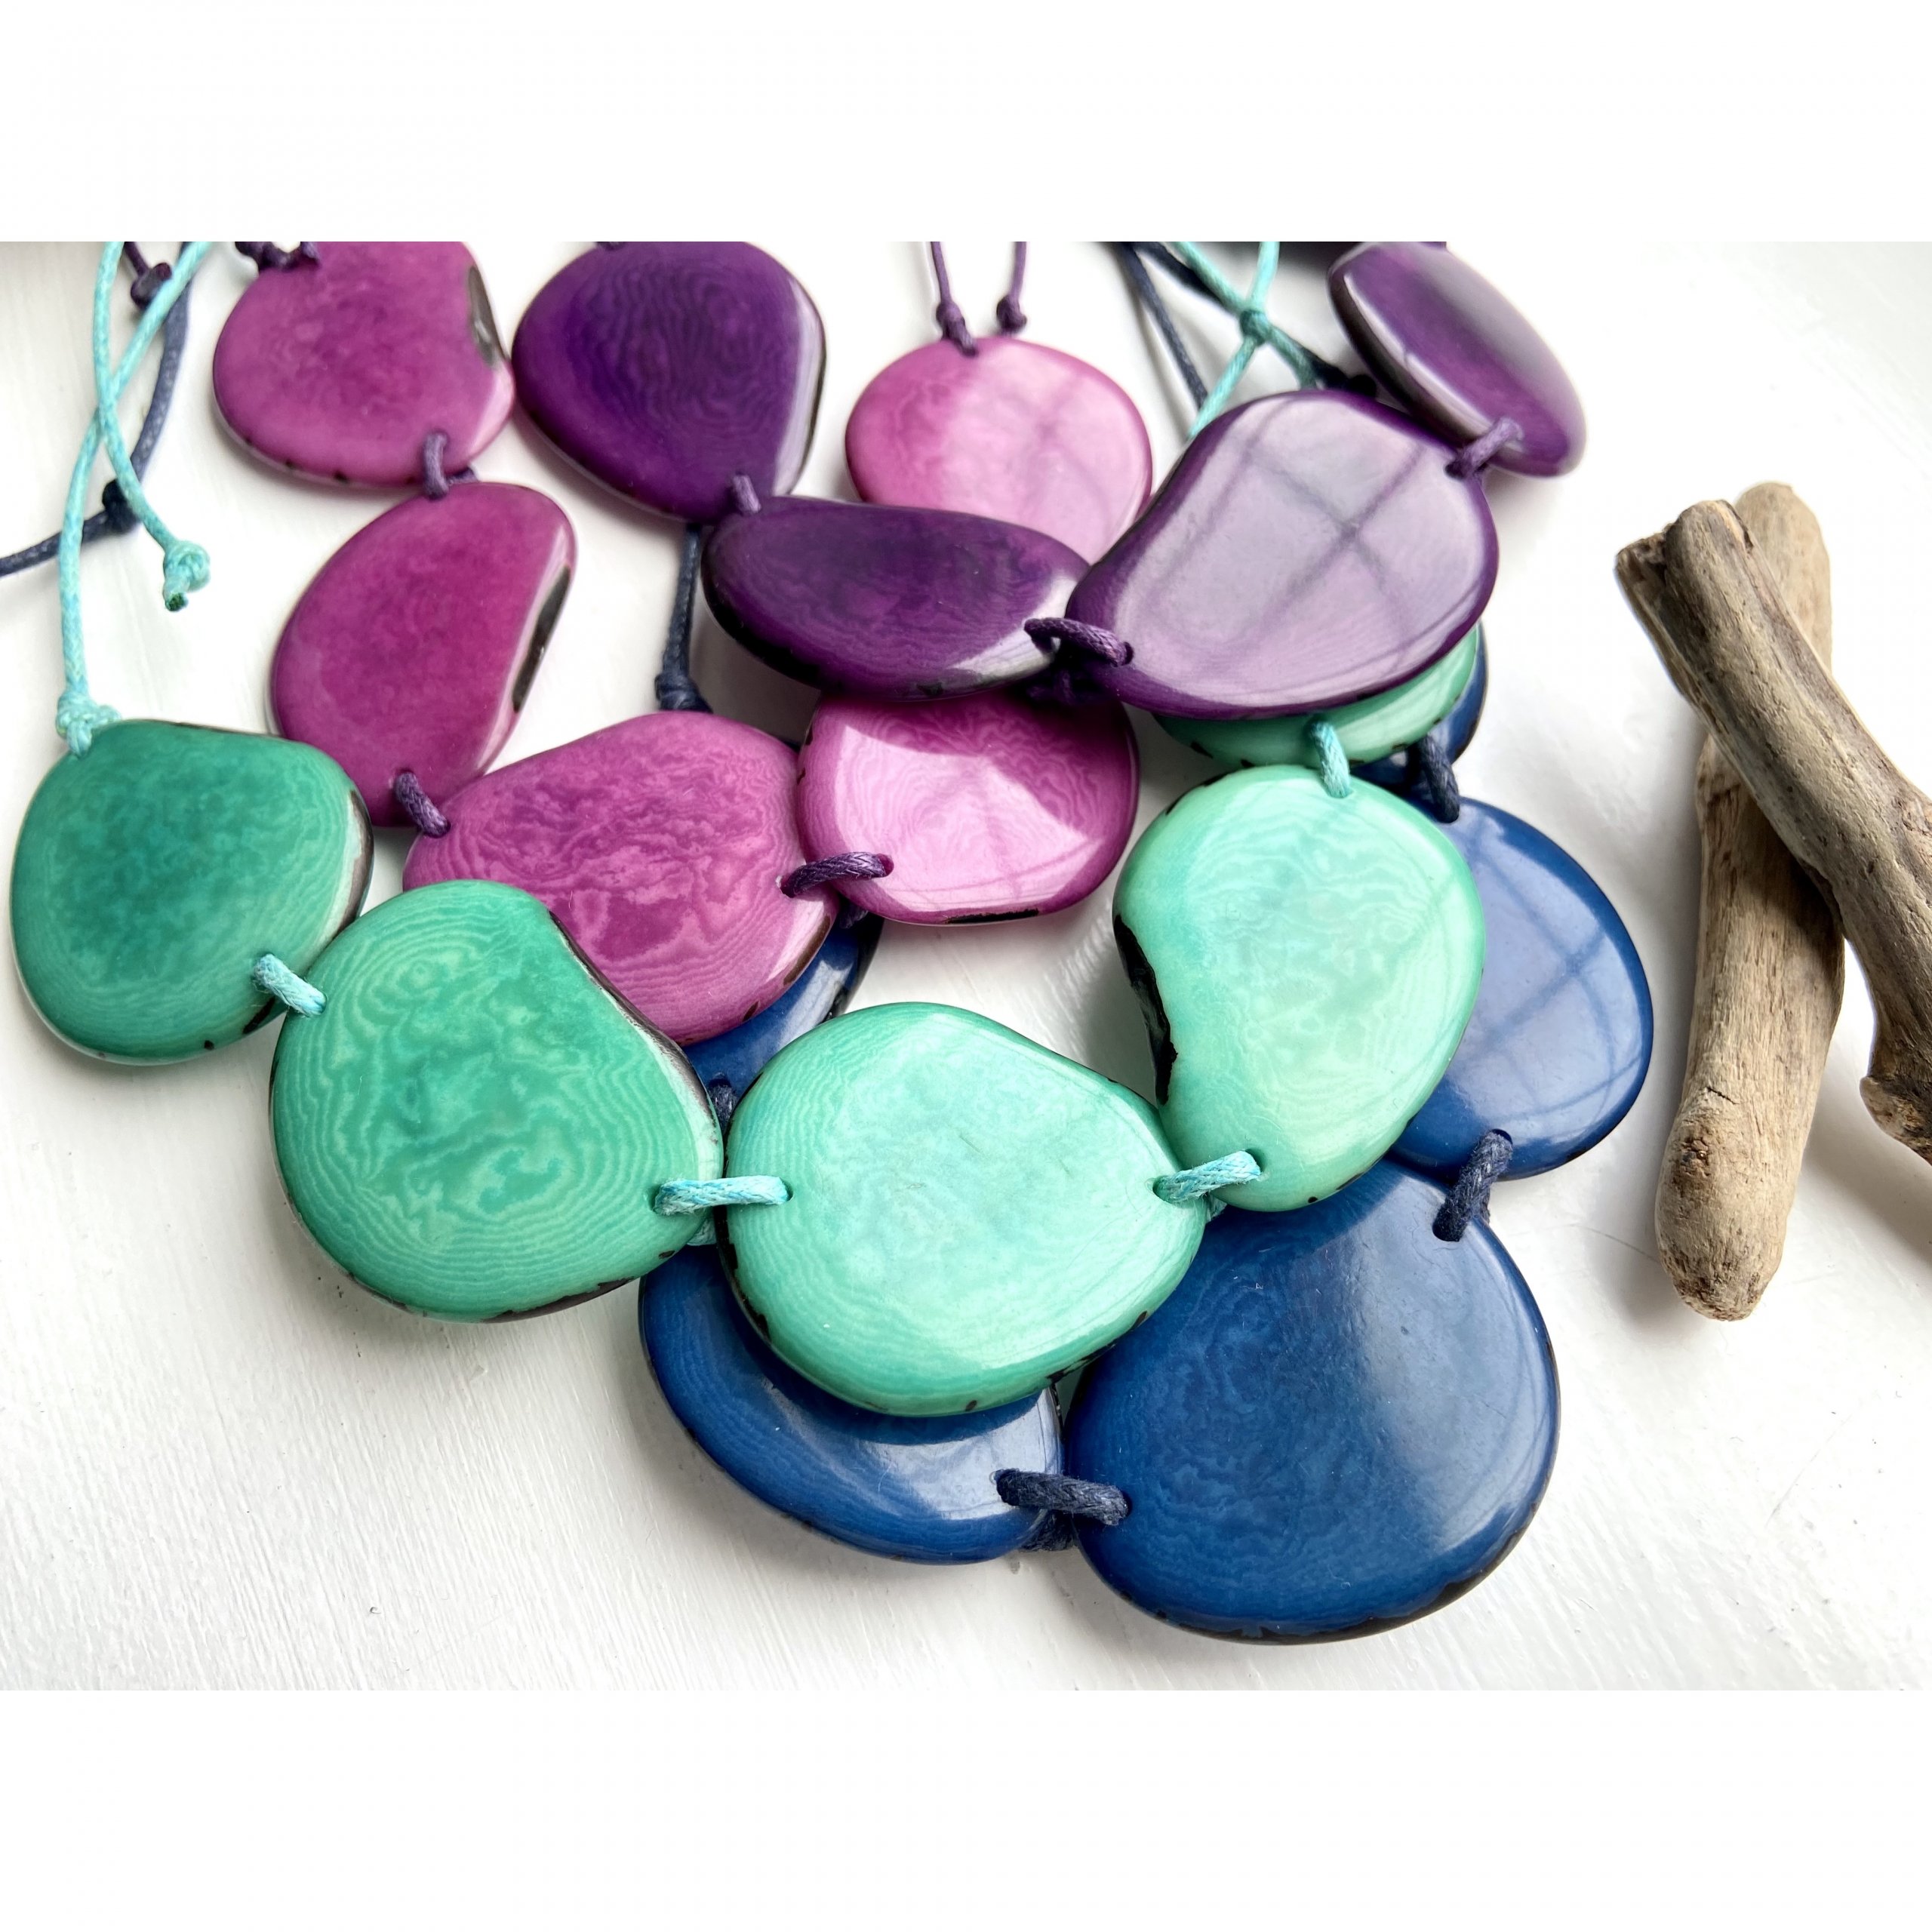 tagua-necklaces-ethical-fairtrade